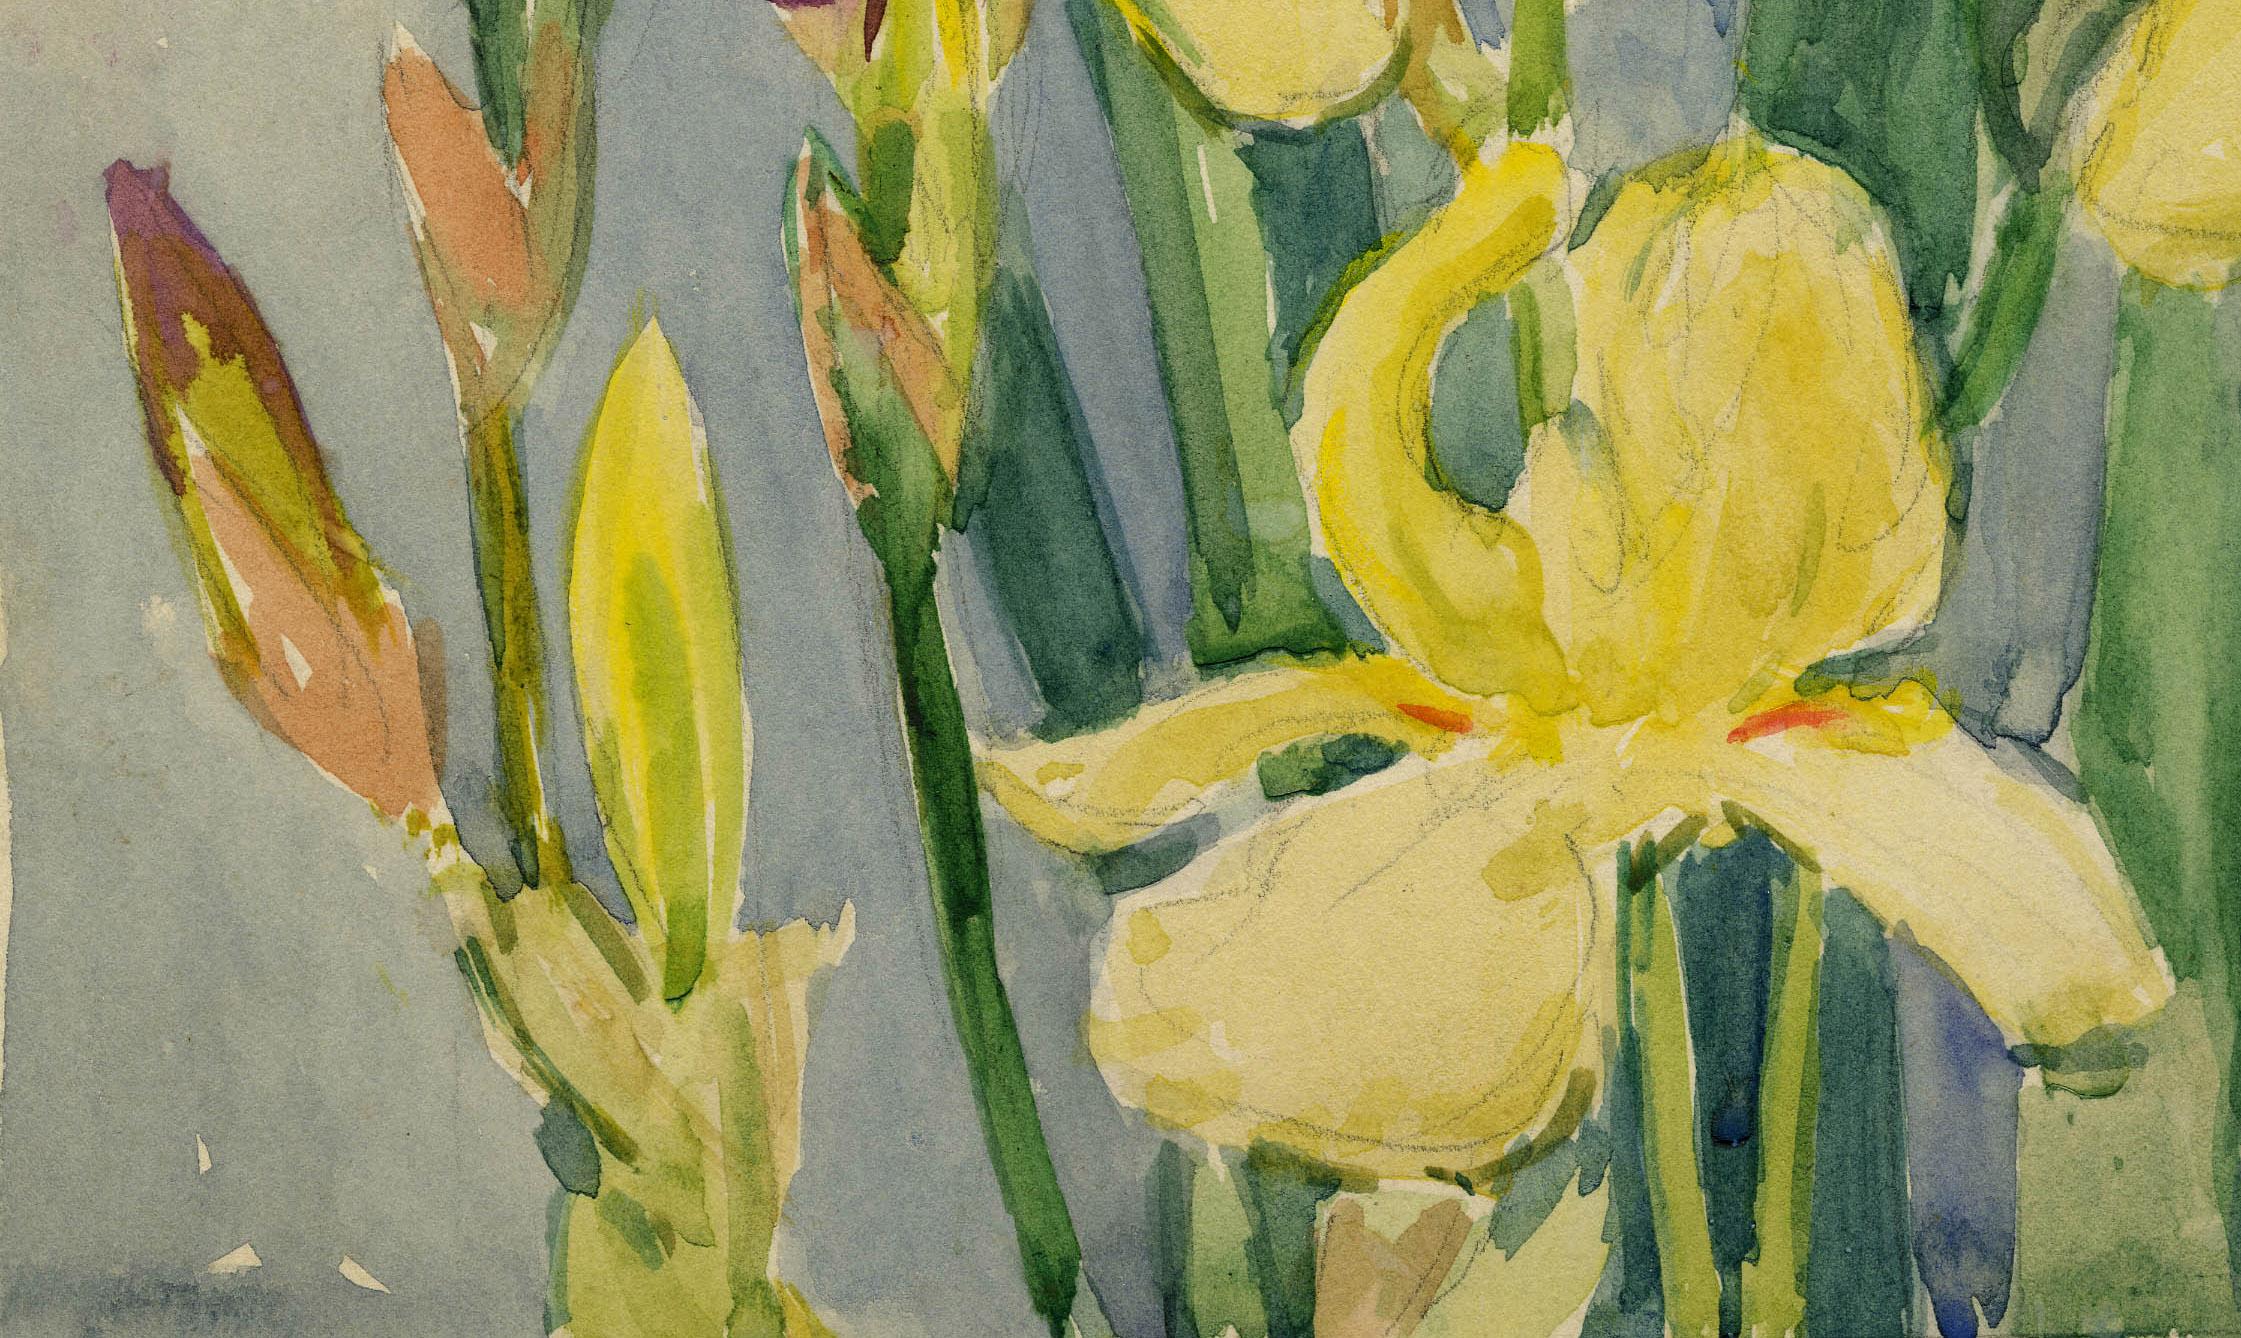 Iris
Watercolor on paper, c. 1920
Unsigned
Provenance: Estate of the Artist
Condition: Excellent, slight surface dirt
Image/Sheet size: 15 x 10 1/4 inches
Allen was trained in Boston, studying under Joseph DeCamp and Frank Benson.

Regarding the